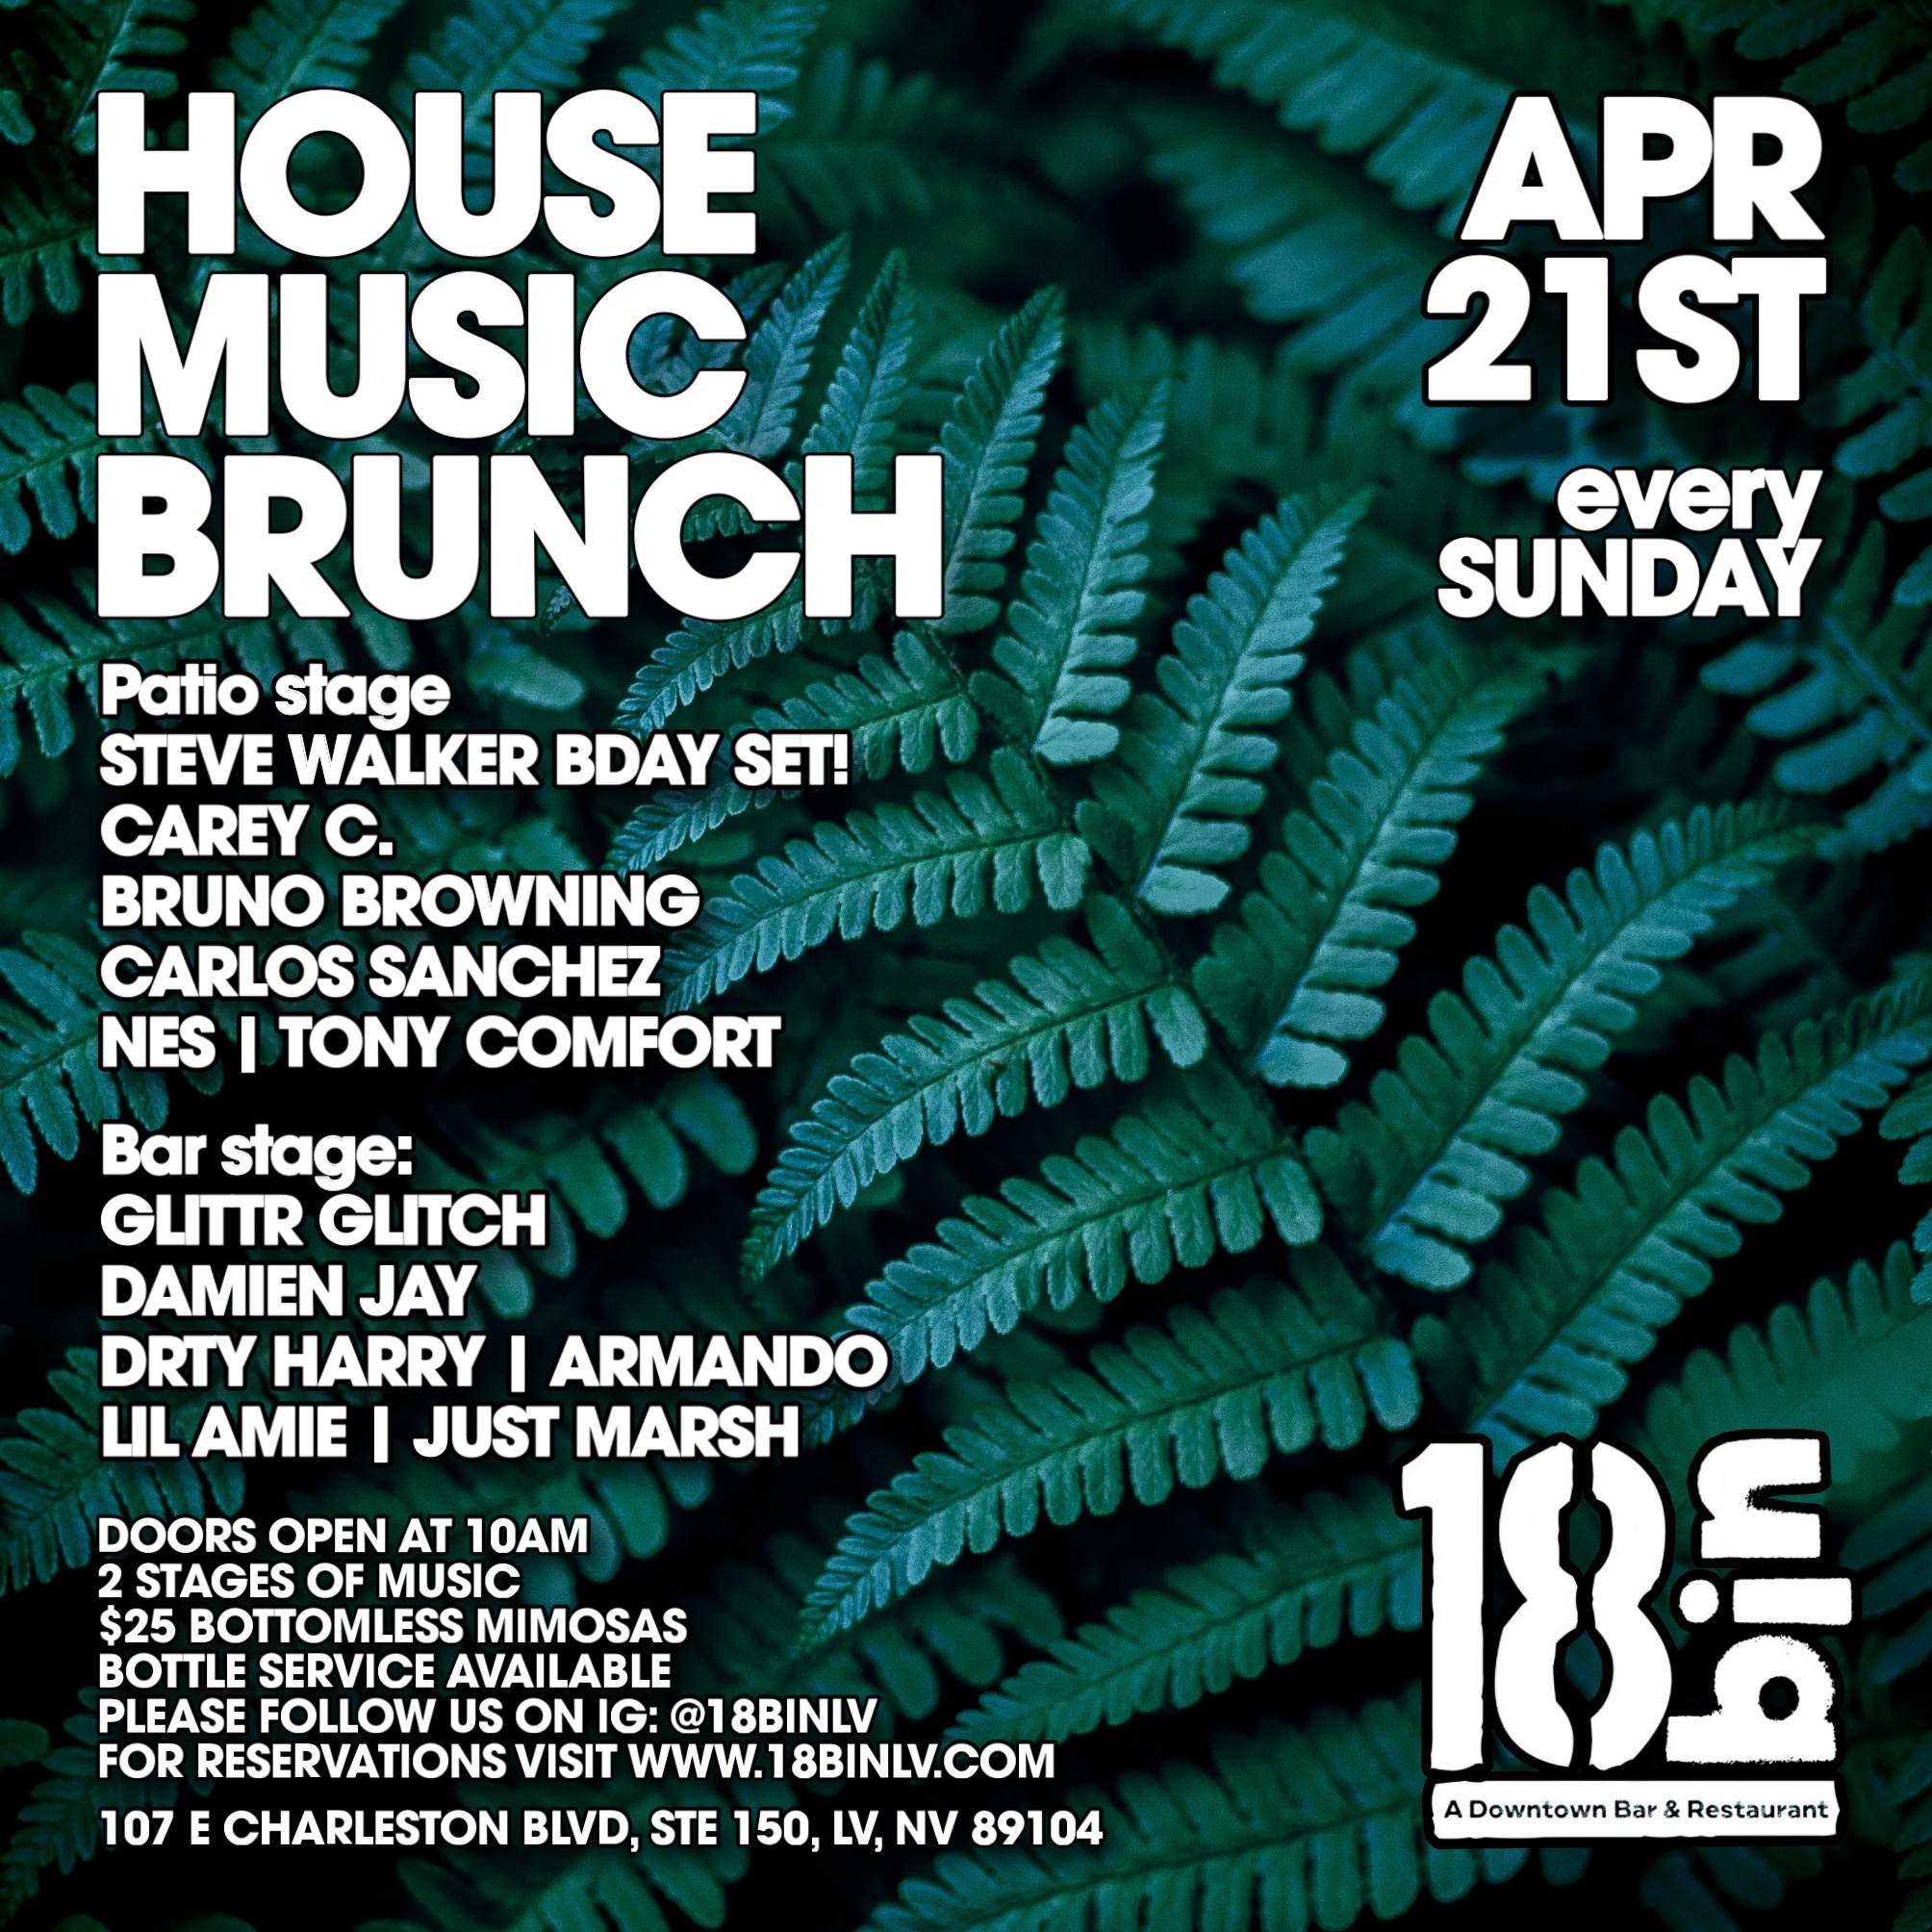 HOUSE MUSIC BRUNCH in the Arts District LV - フライヤー裏